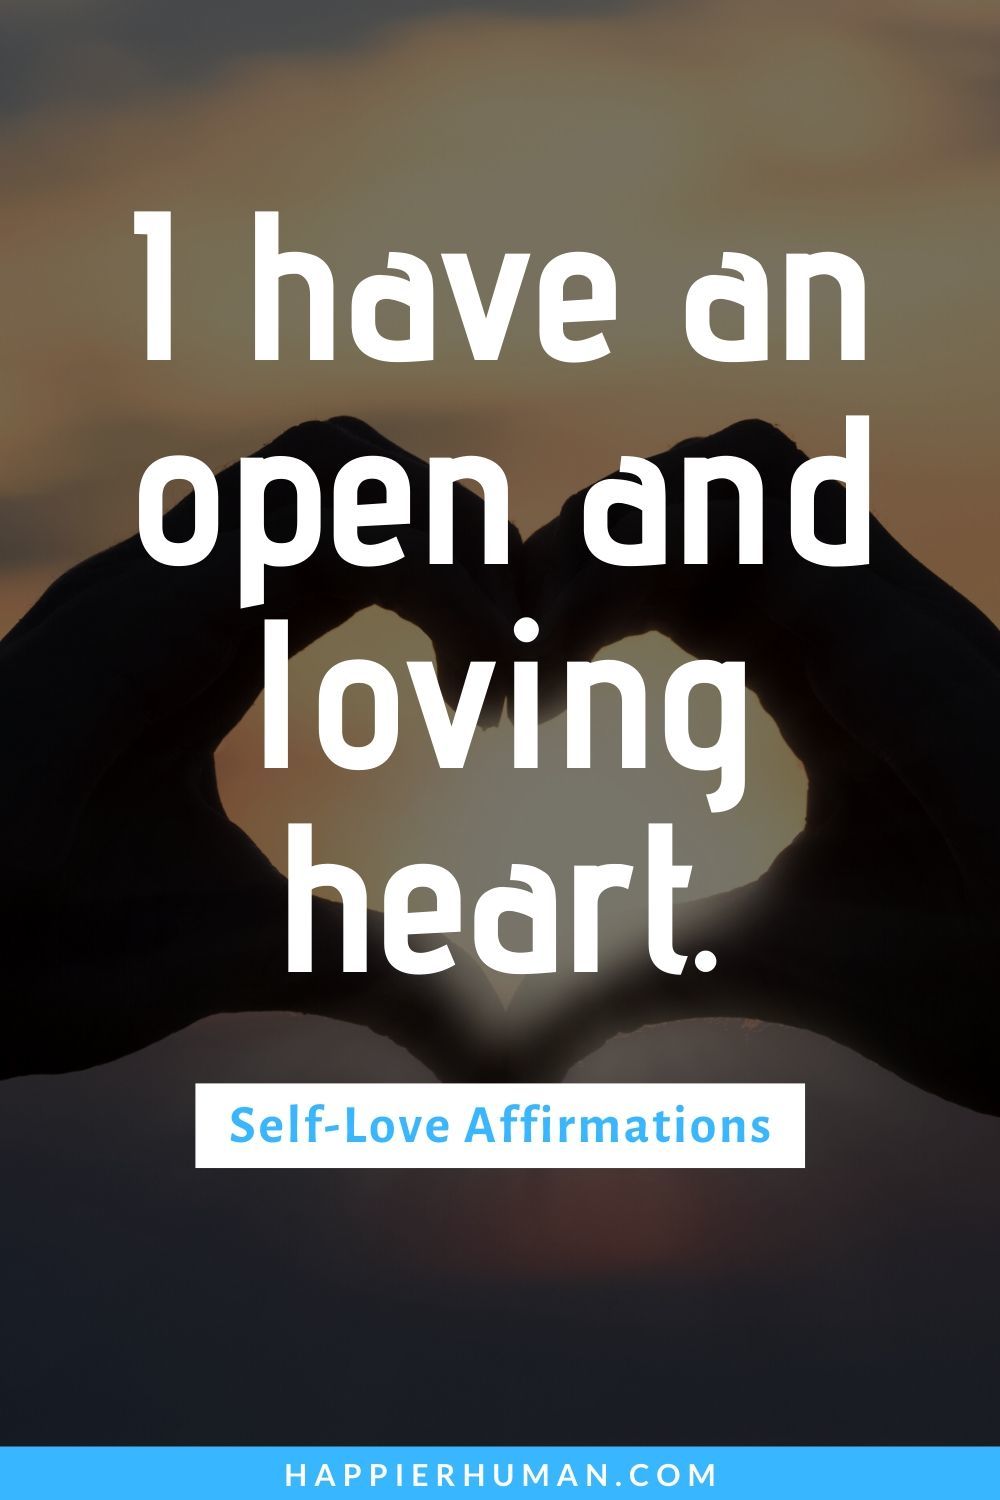 Self Love Affirmations - “I have an open and loving heart.” | self love affirmations | spiritual self love affirmations | self love affirmations pdf #affirmations #affirmationsoftheday #affirmationswork